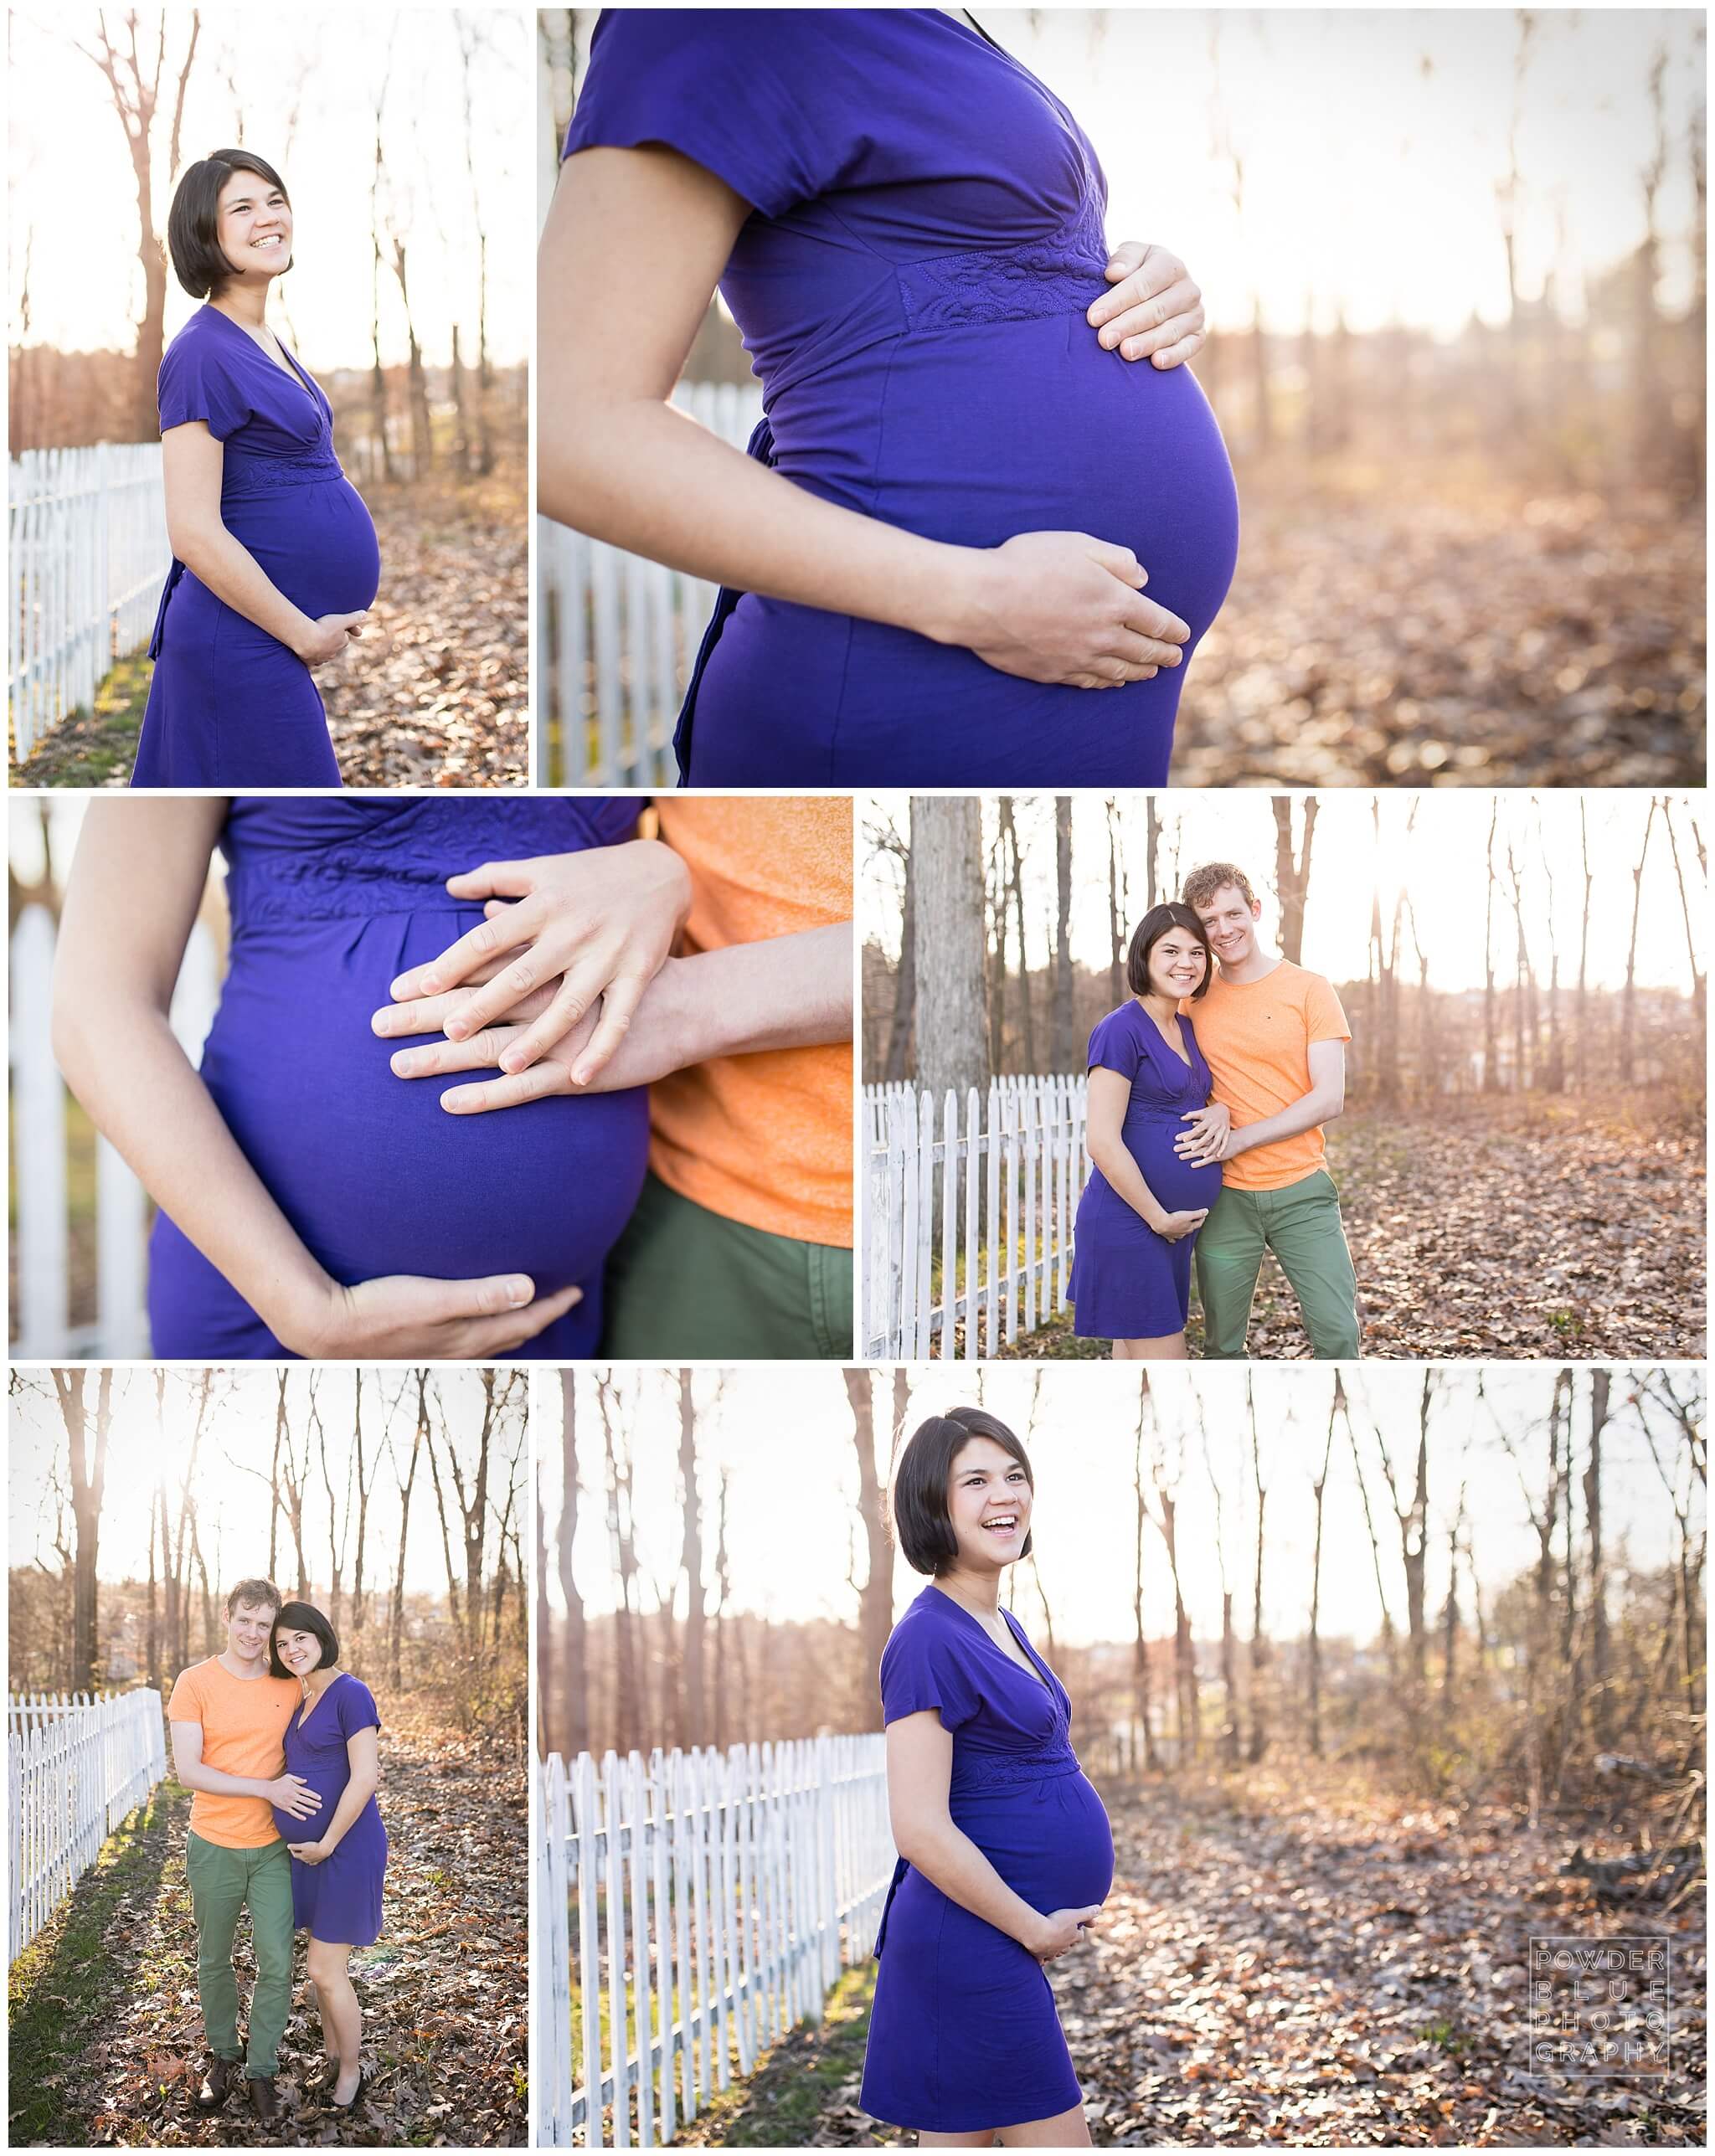 Pittsburgh maternity photography session at nature park.